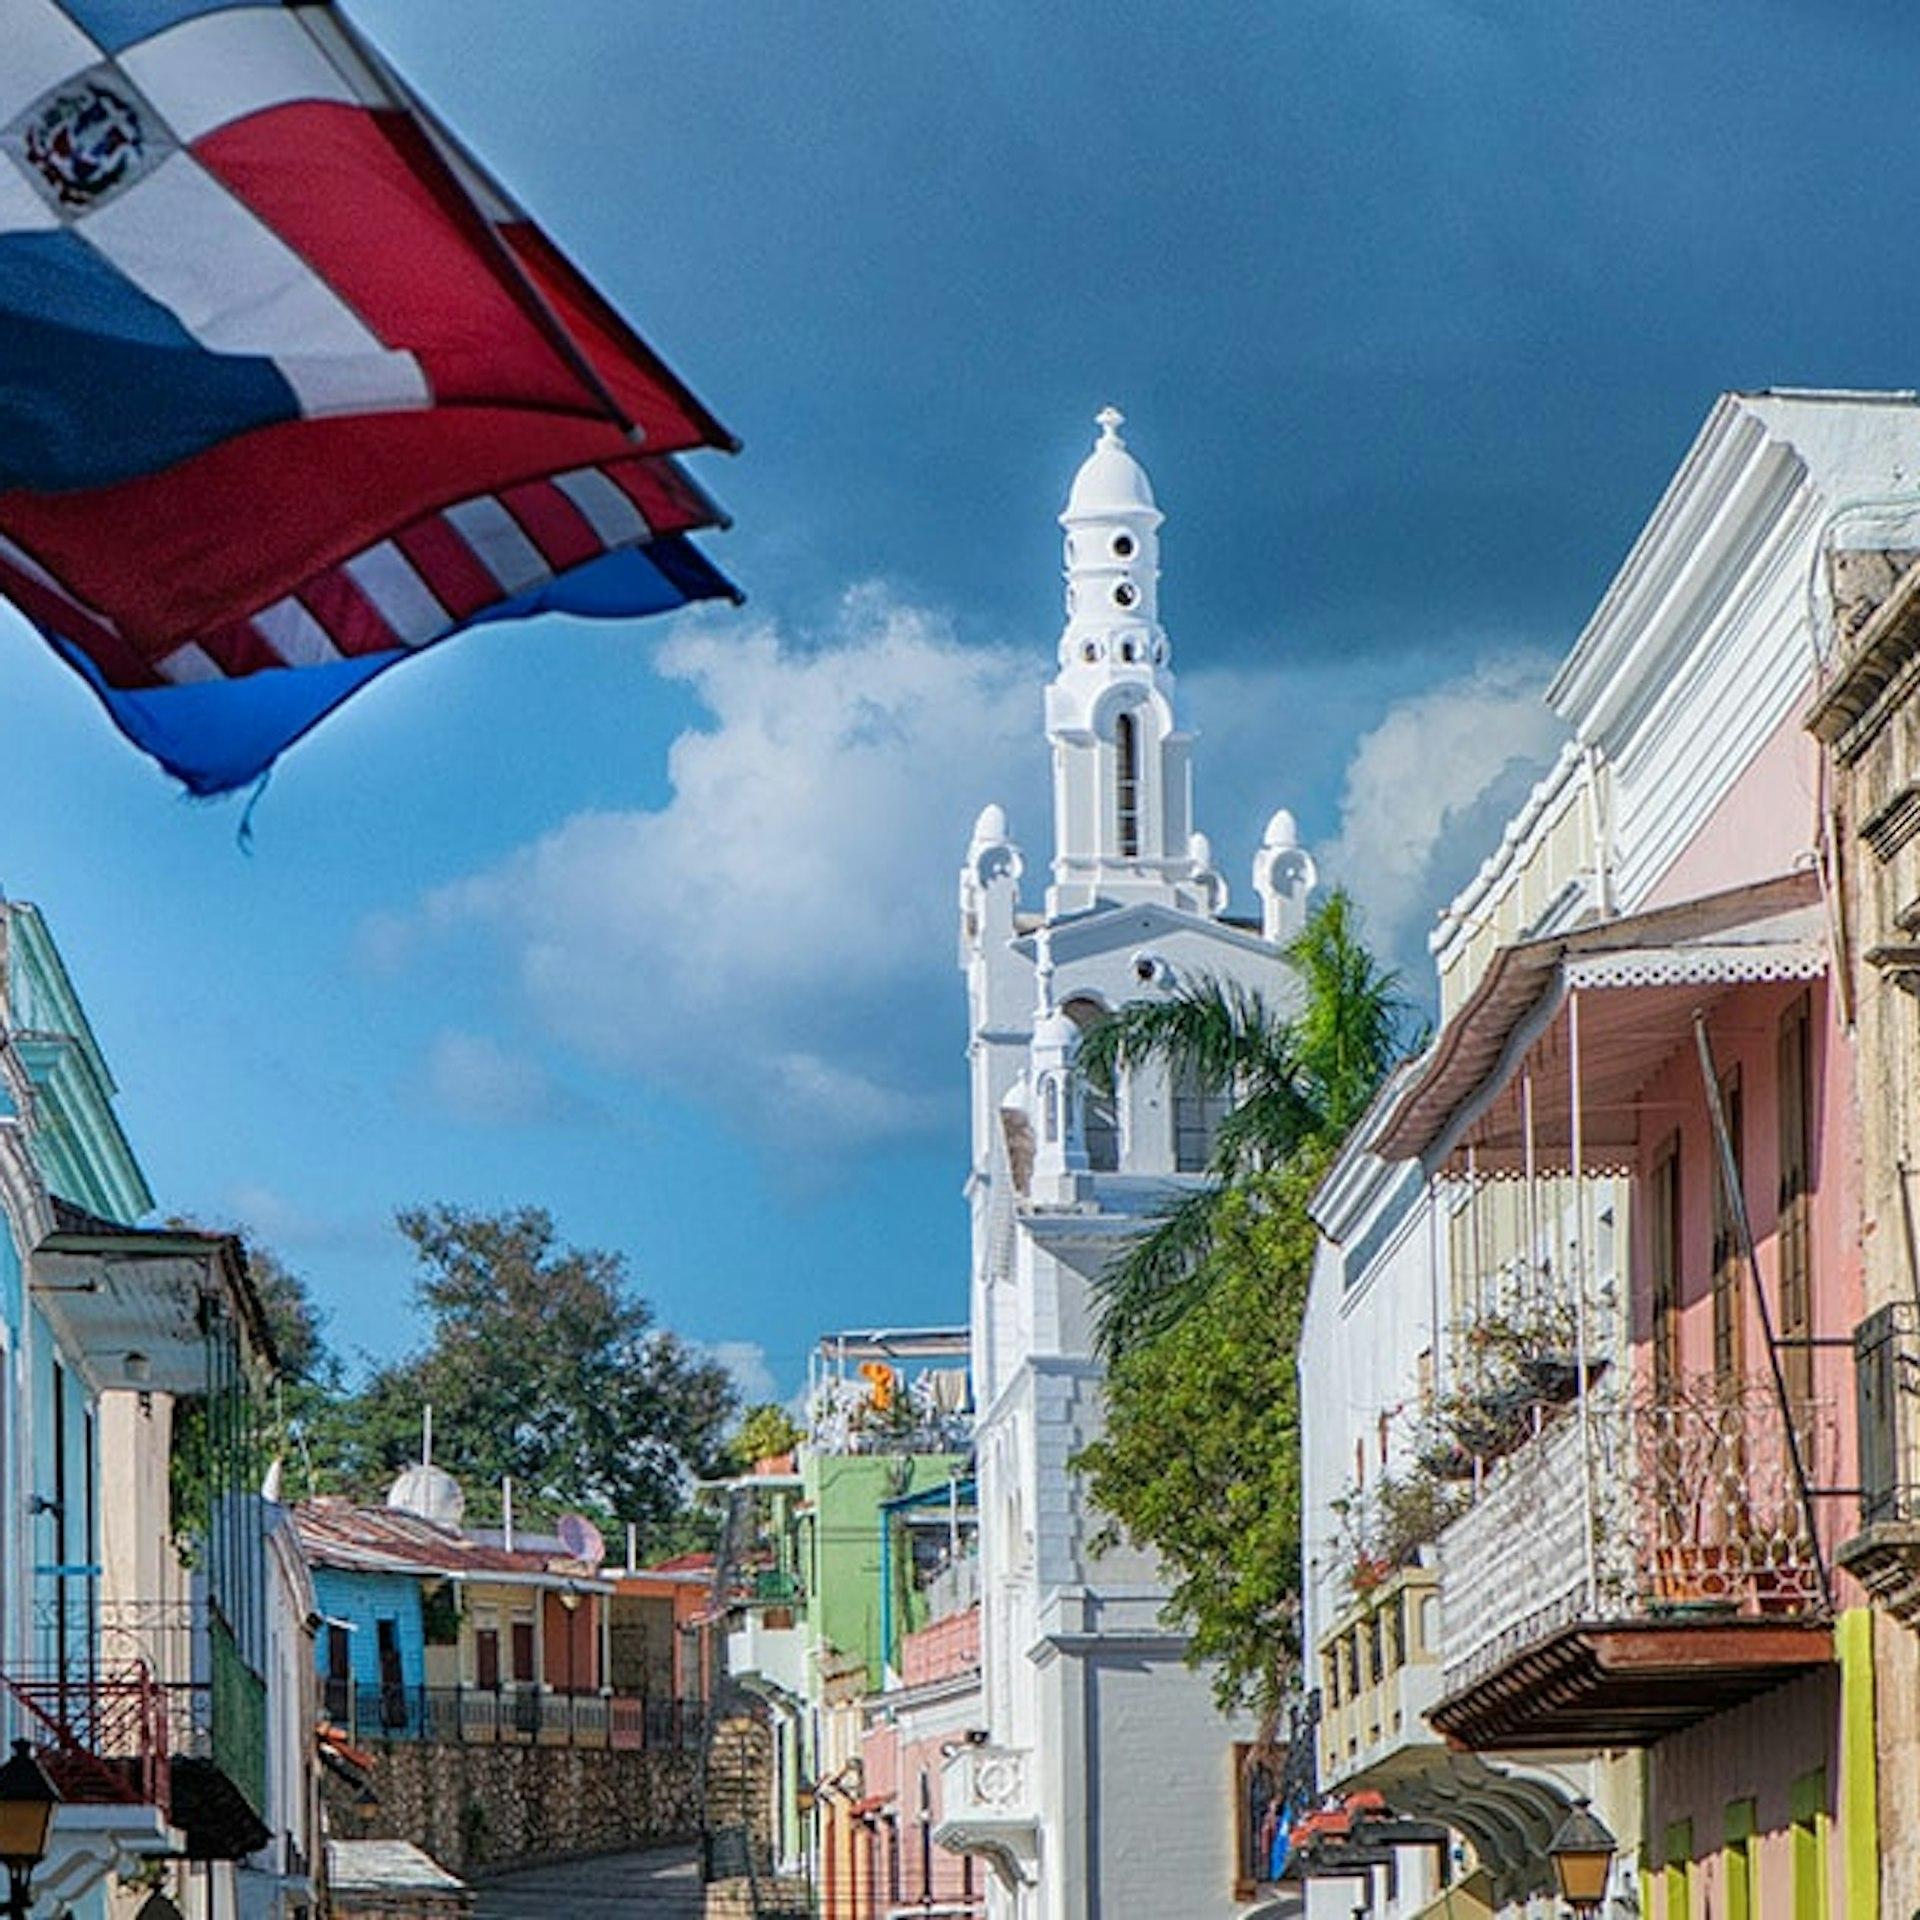 Get the latest news and updates on e-invoicing, e-ordering, e-archiving and indirect tax regulatory requirements for the Dominican Republic.